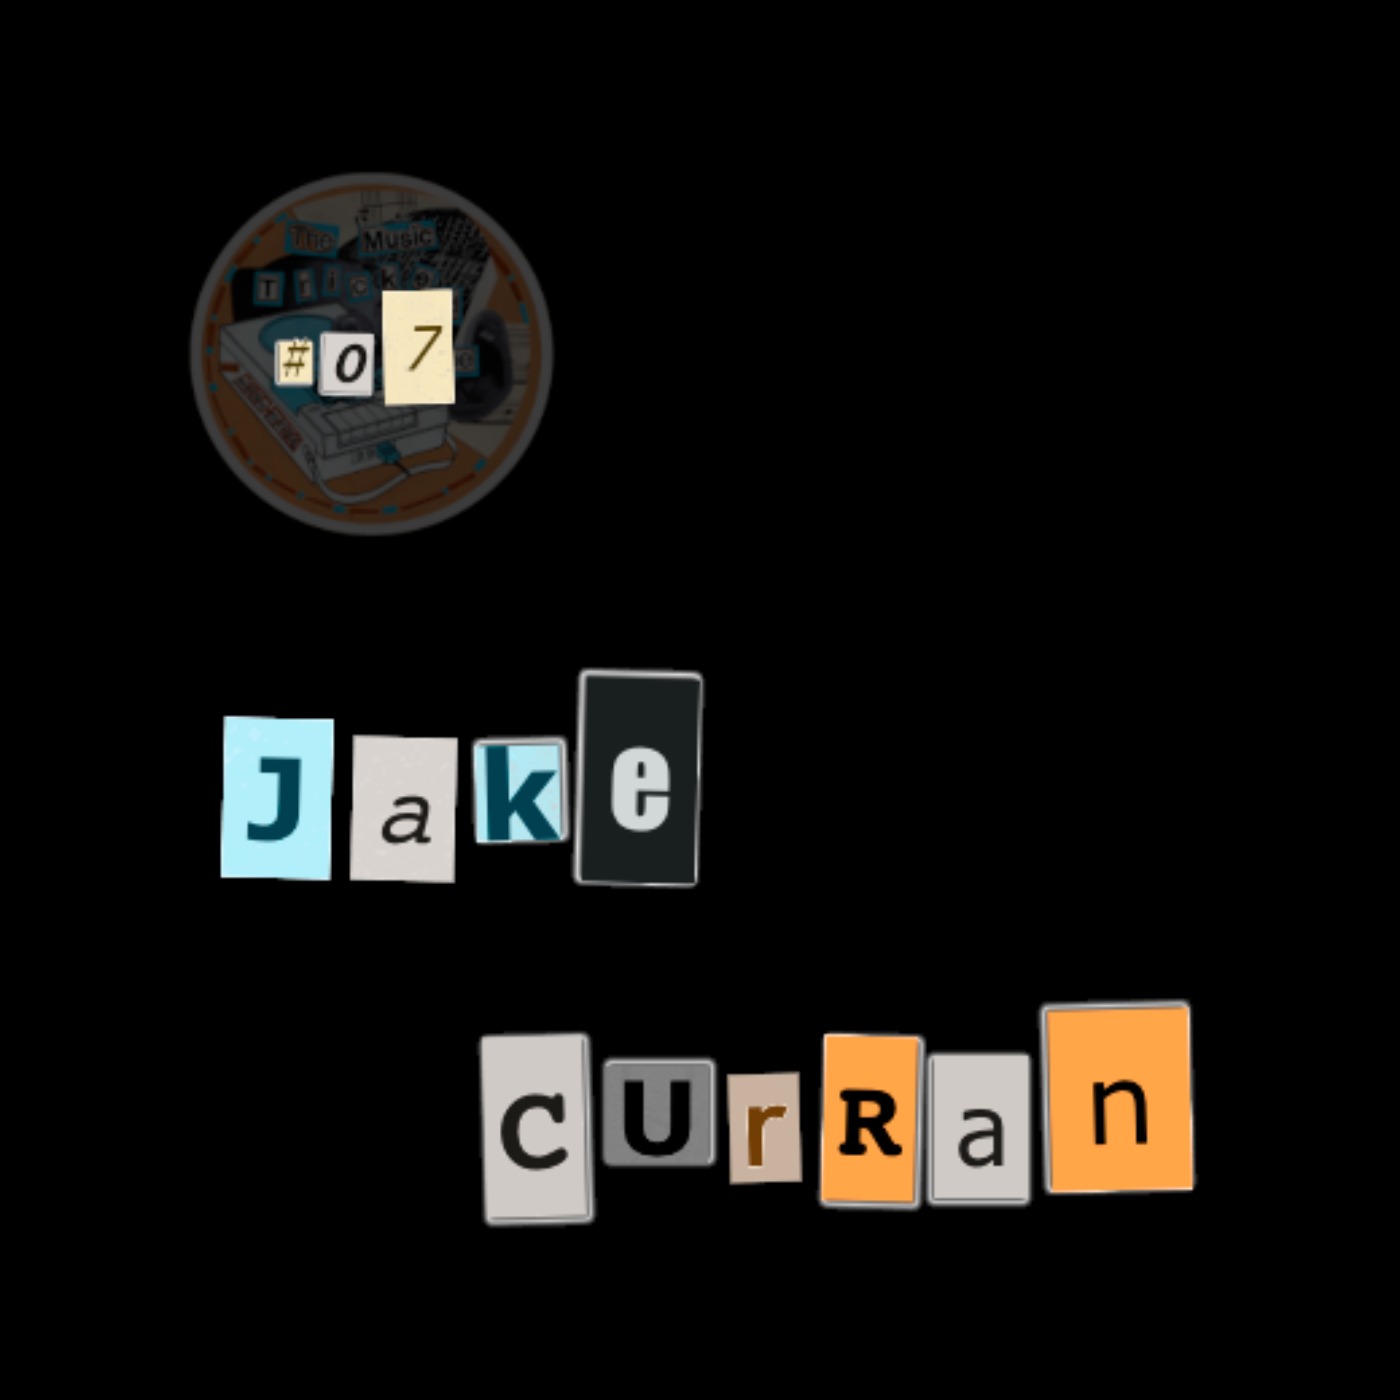 Ep.07 : Let's Set The (Guitar) Tone ! with Jake Curran